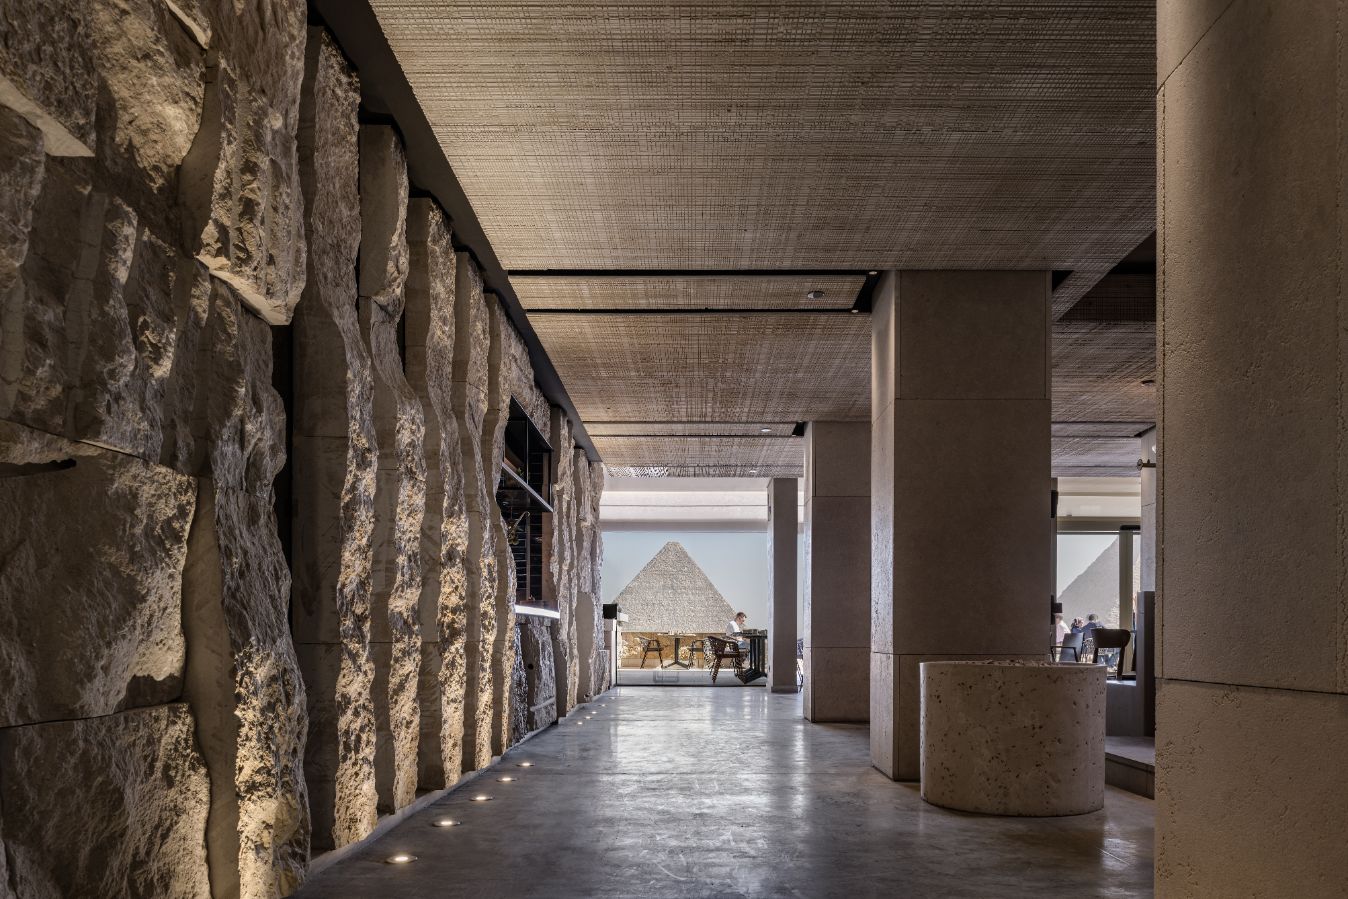 How Khufu’s Restaurant Caters to Modern Appetites at the Giza Pyramids